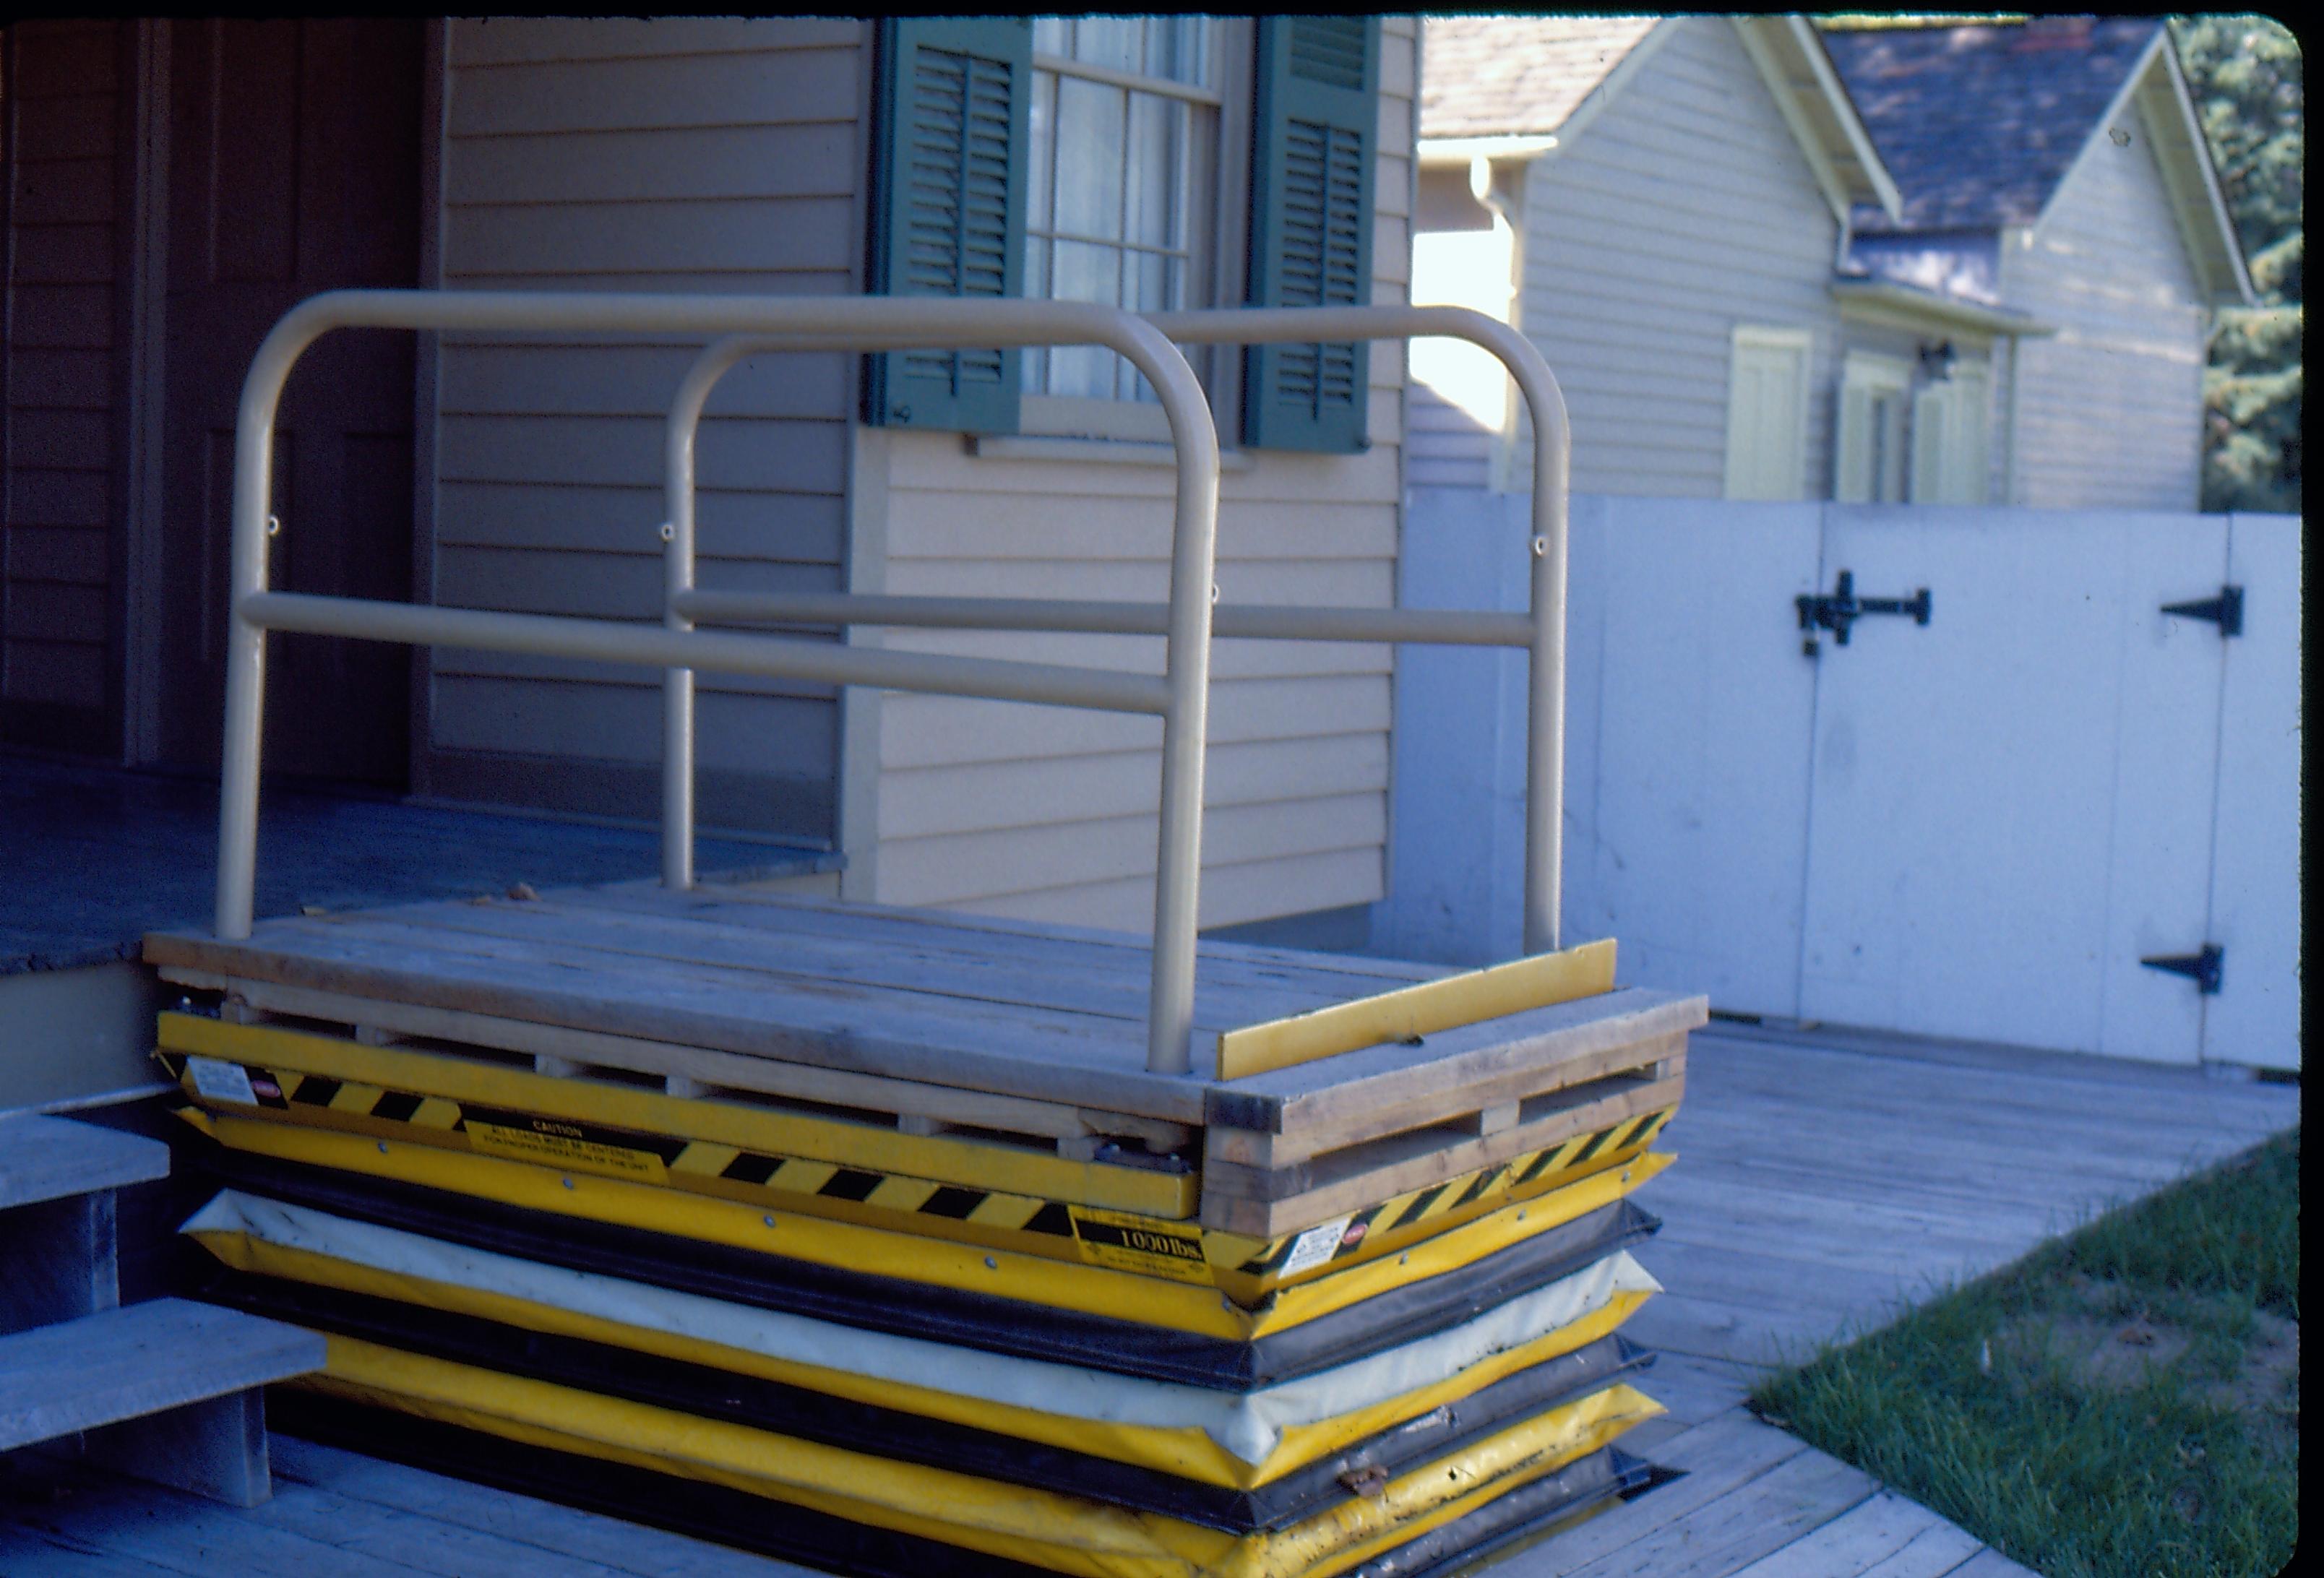 Lincoln Home wheelchair lift at full height. Photographer facing north west.